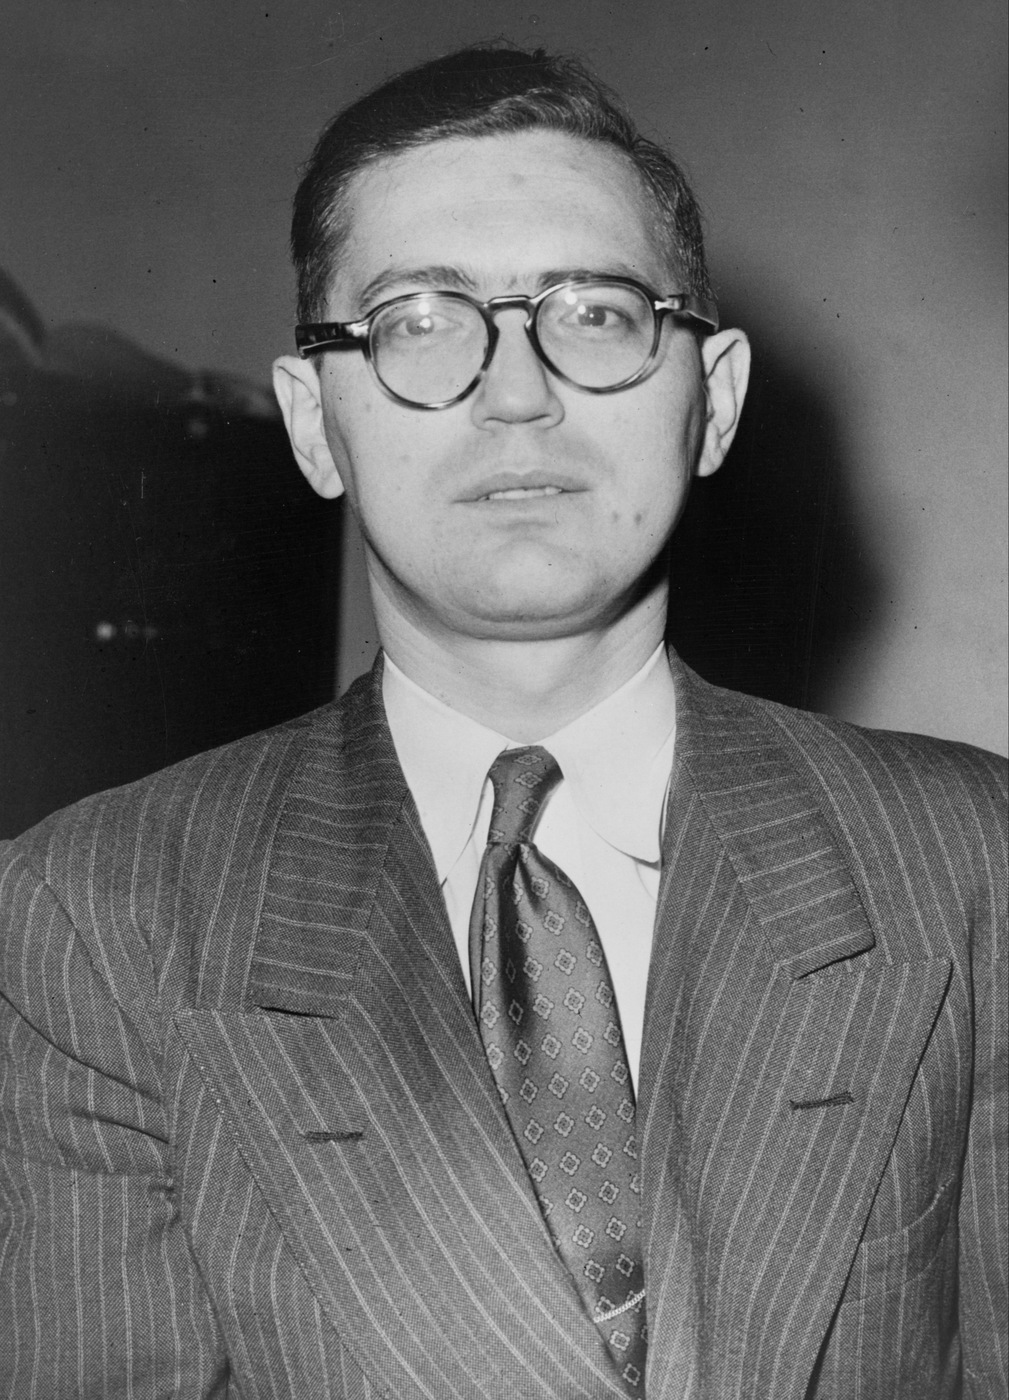 Max Elitcher, a naval ordnance engineer and an admitted communist, provided crucial testimony in the Rosenberg trial. Library of Congress photograph.